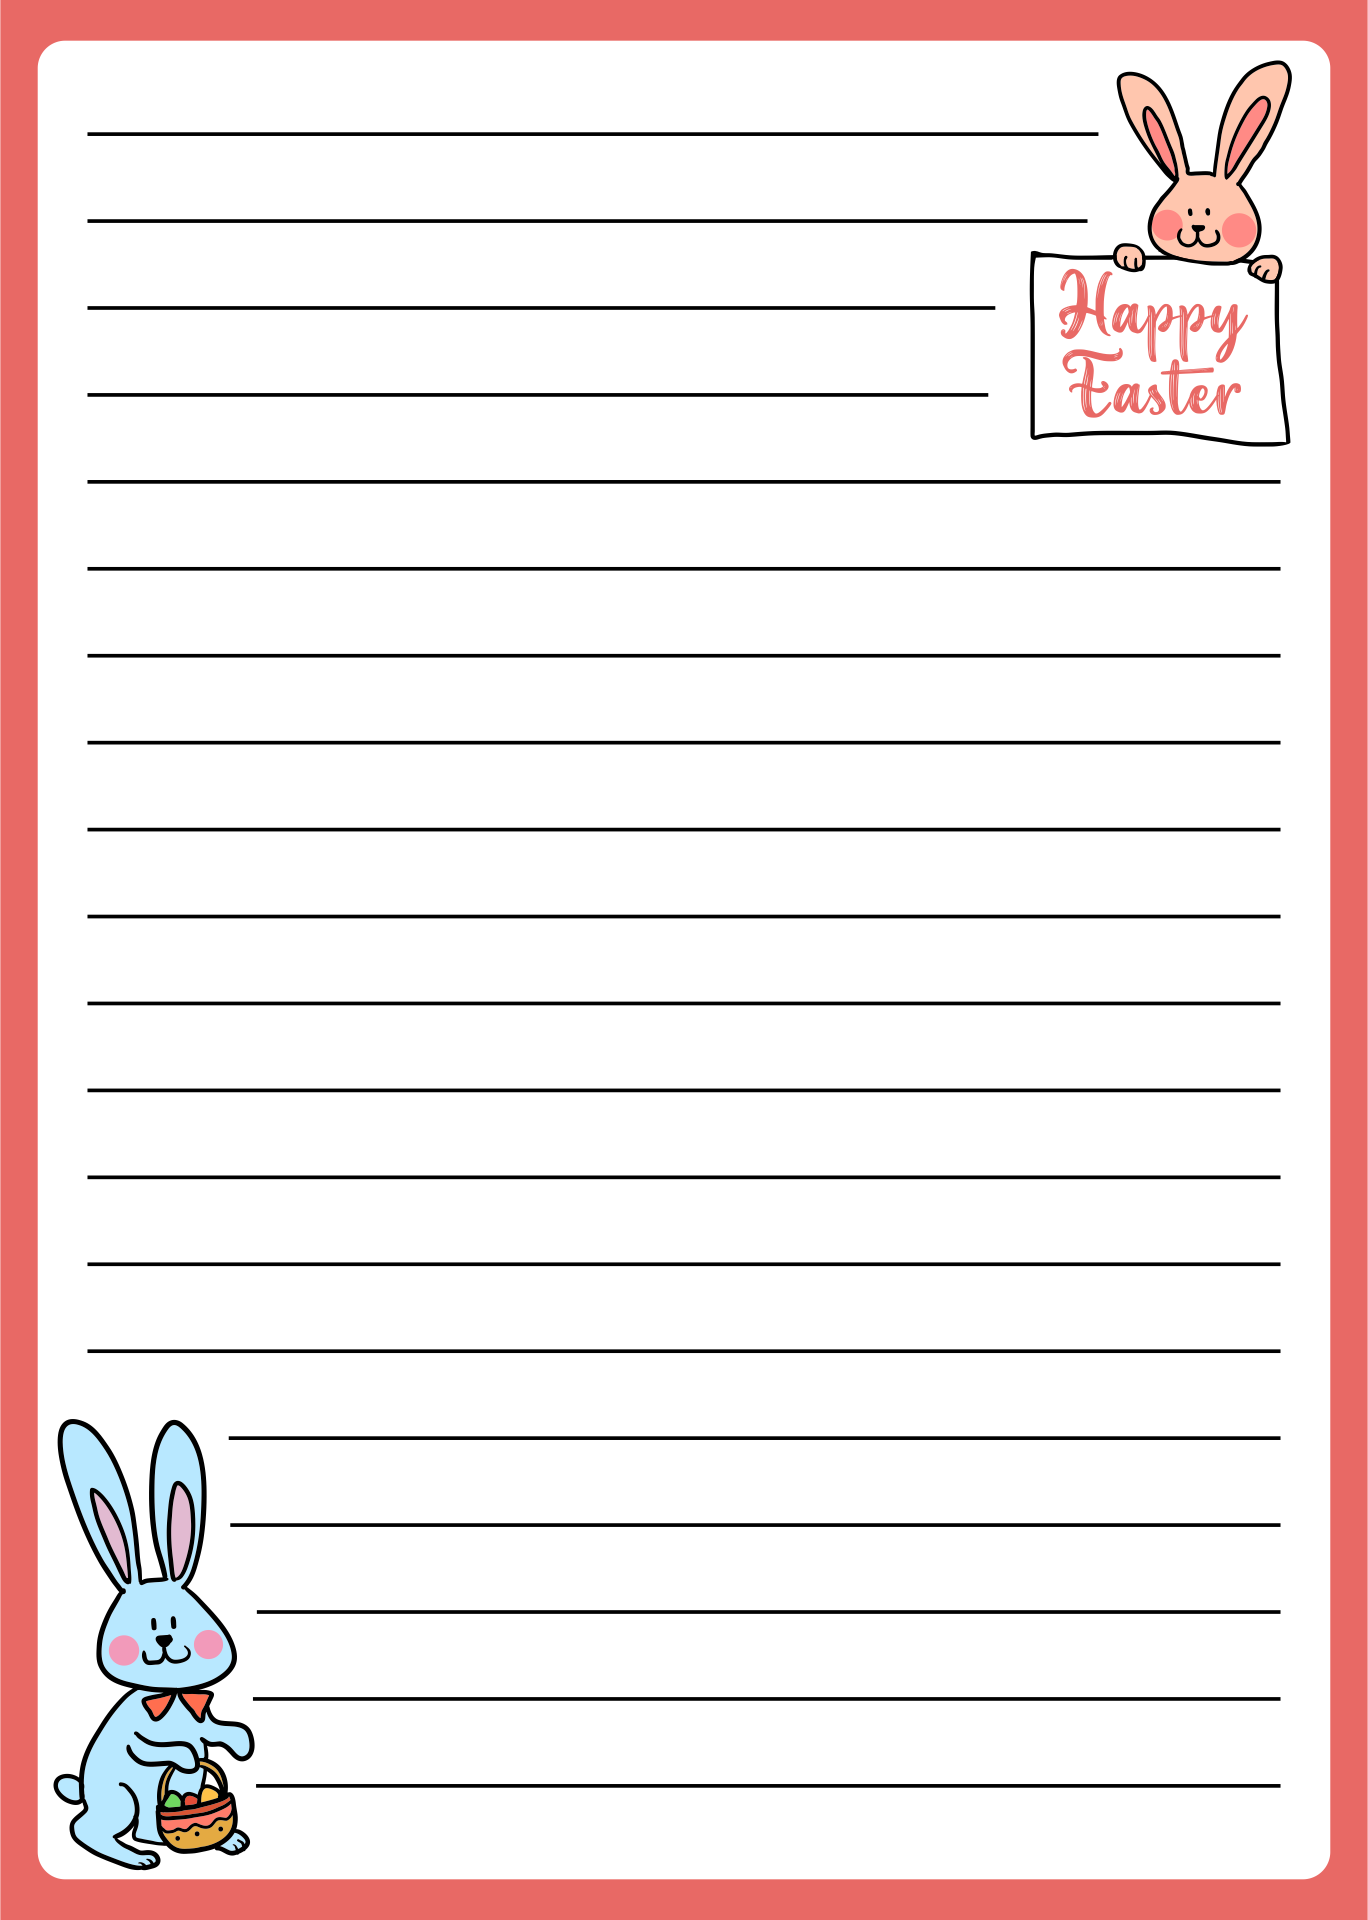 Printable Easter Stationery